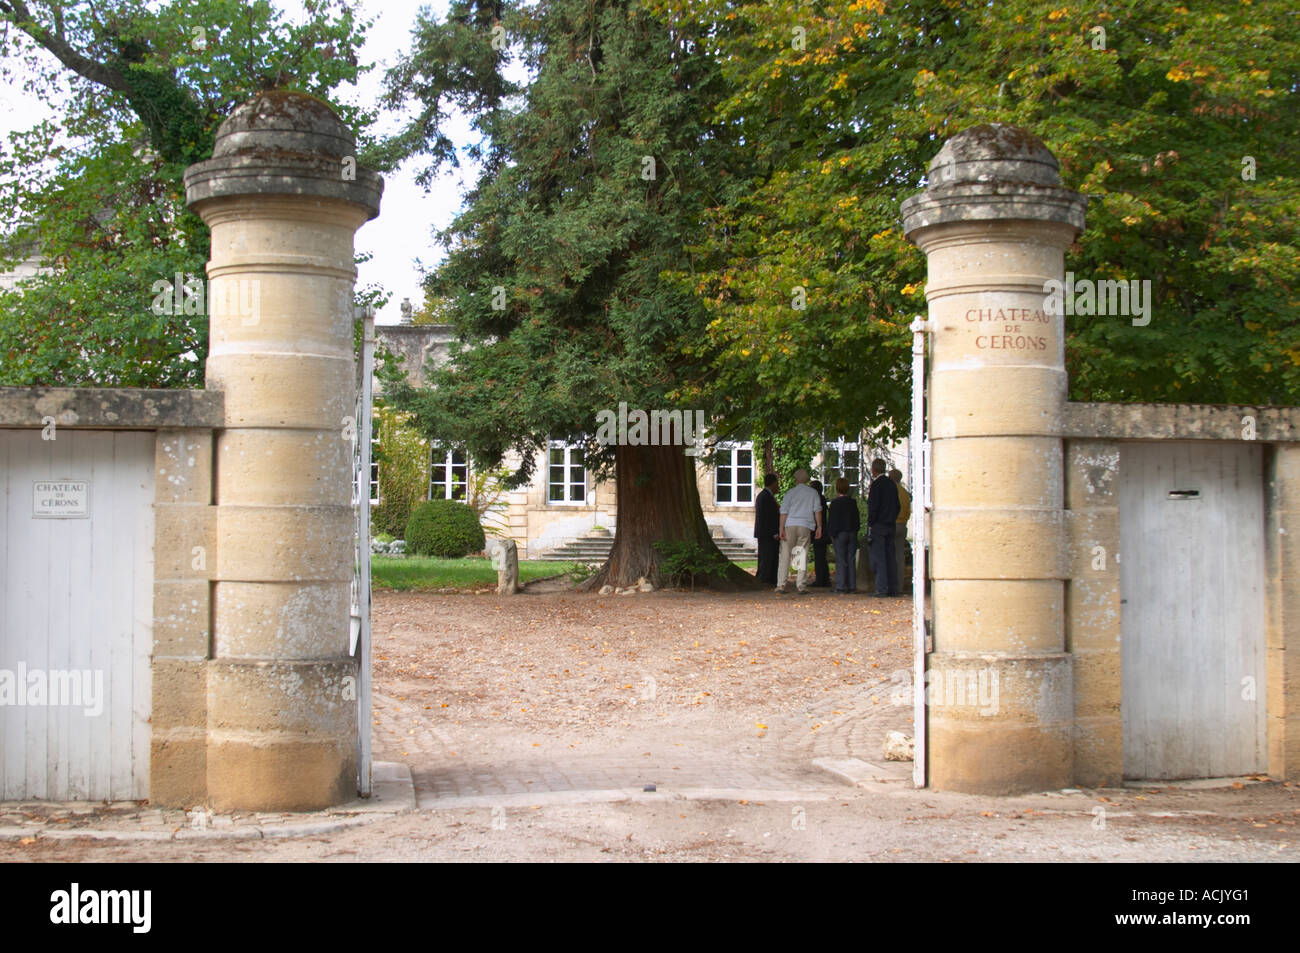 The gate posts and entrance to the chateau Chateau de Cerons (Cérons) Sauternes Gironde Aquitaine France Stock Photo